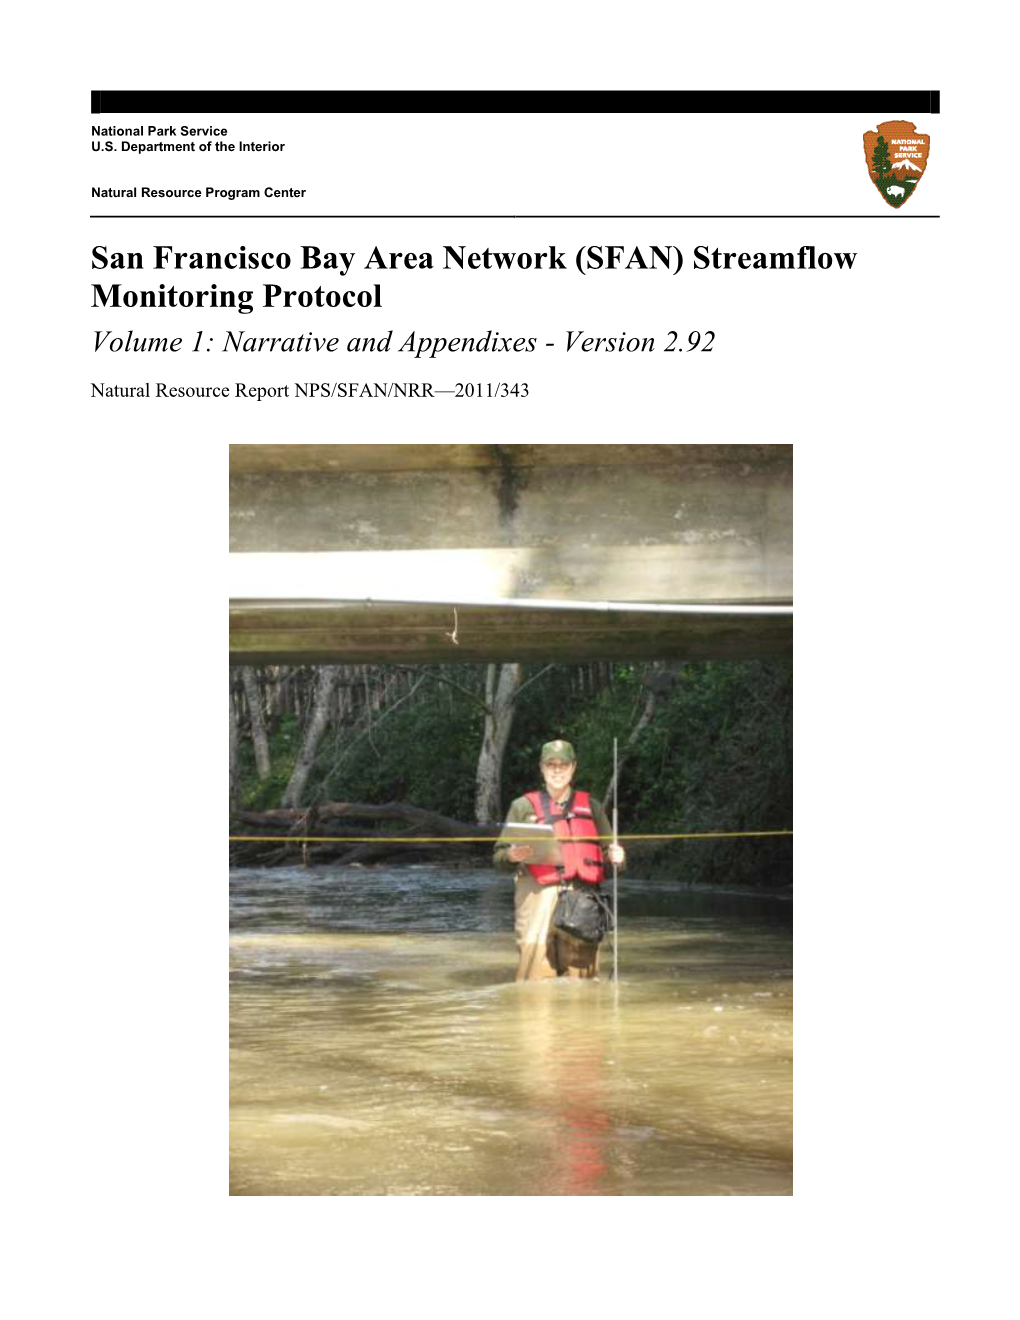 Freshwater Dynamics Monitoring Protocol for the National Park